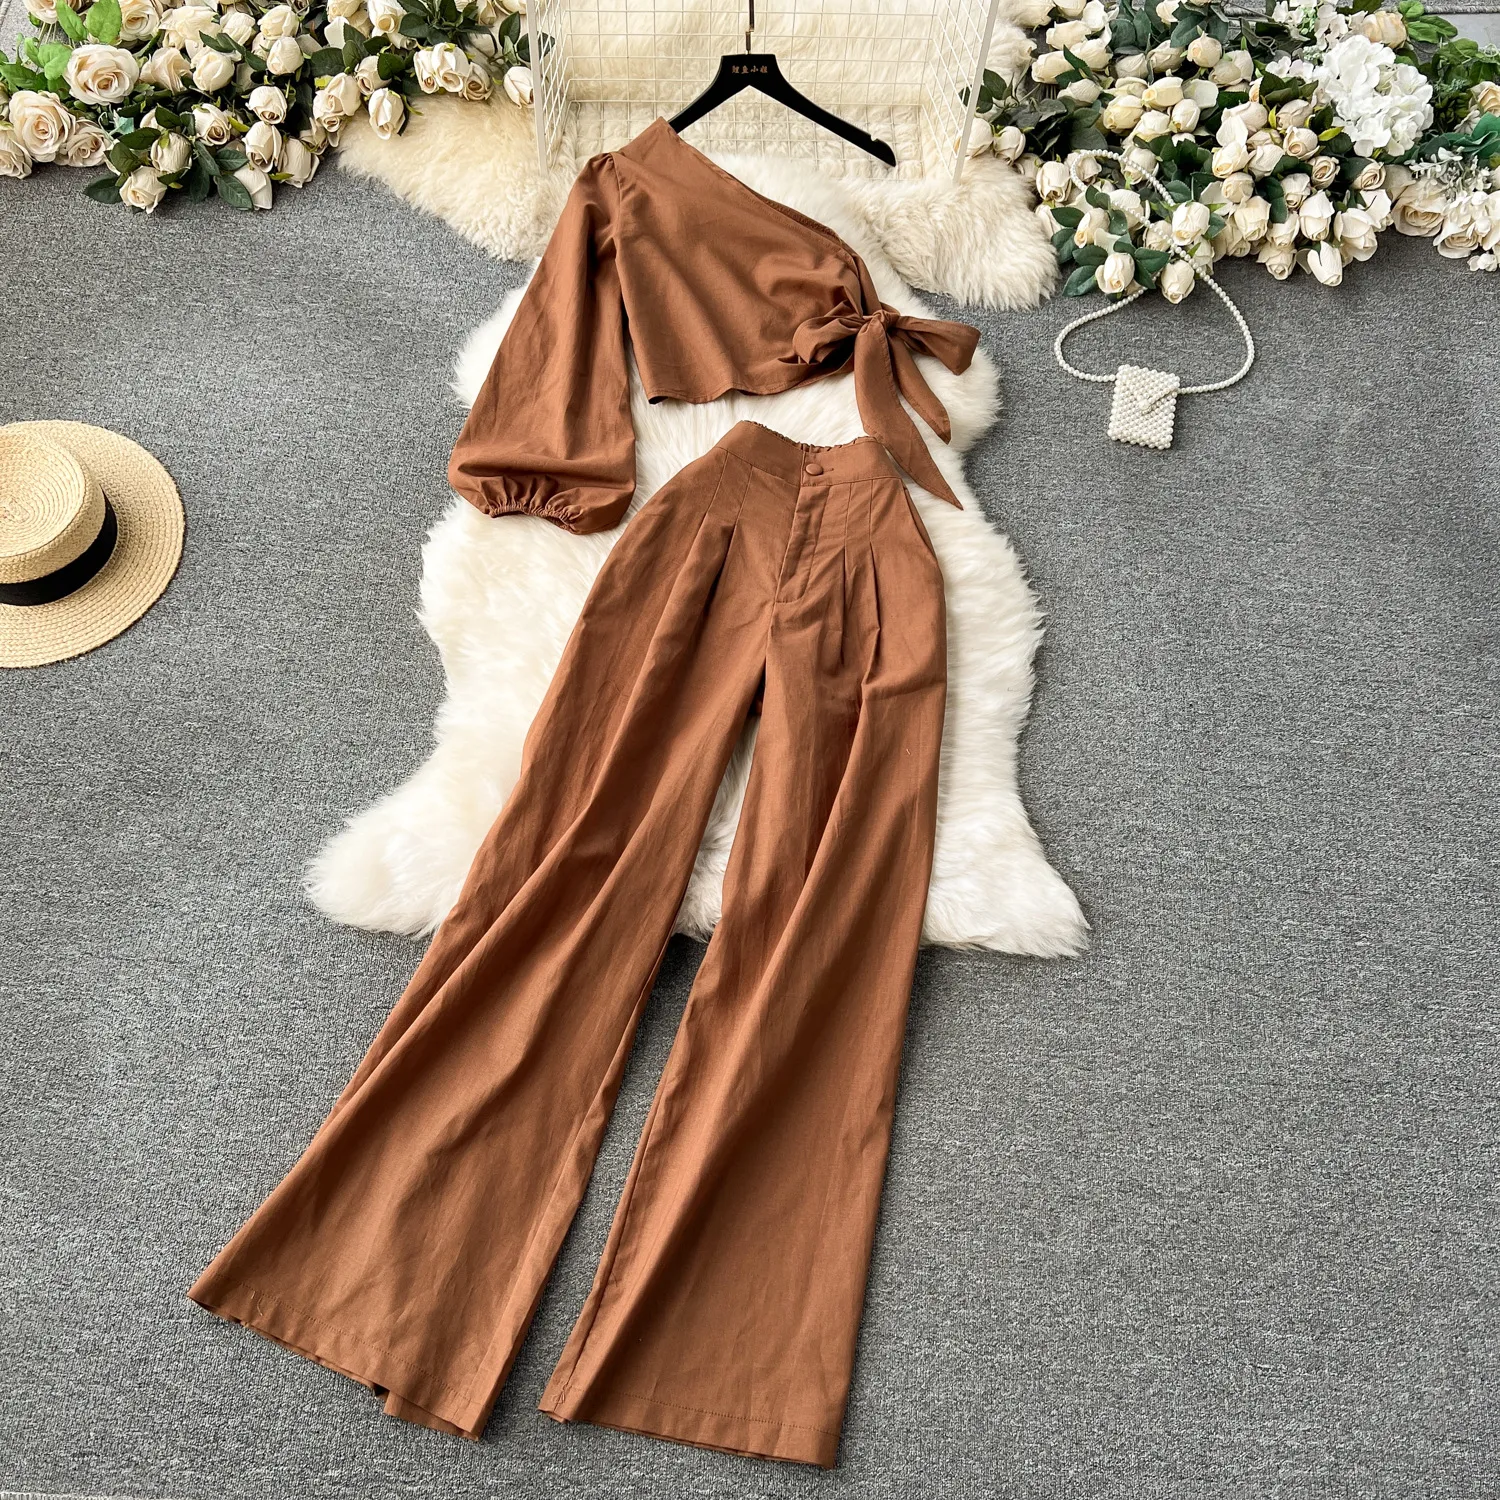 European and American spring clothing women's design sense slanted collar off the shoulder bubble sleeve top high waisted slimming wide leg pants fashion two-piece set